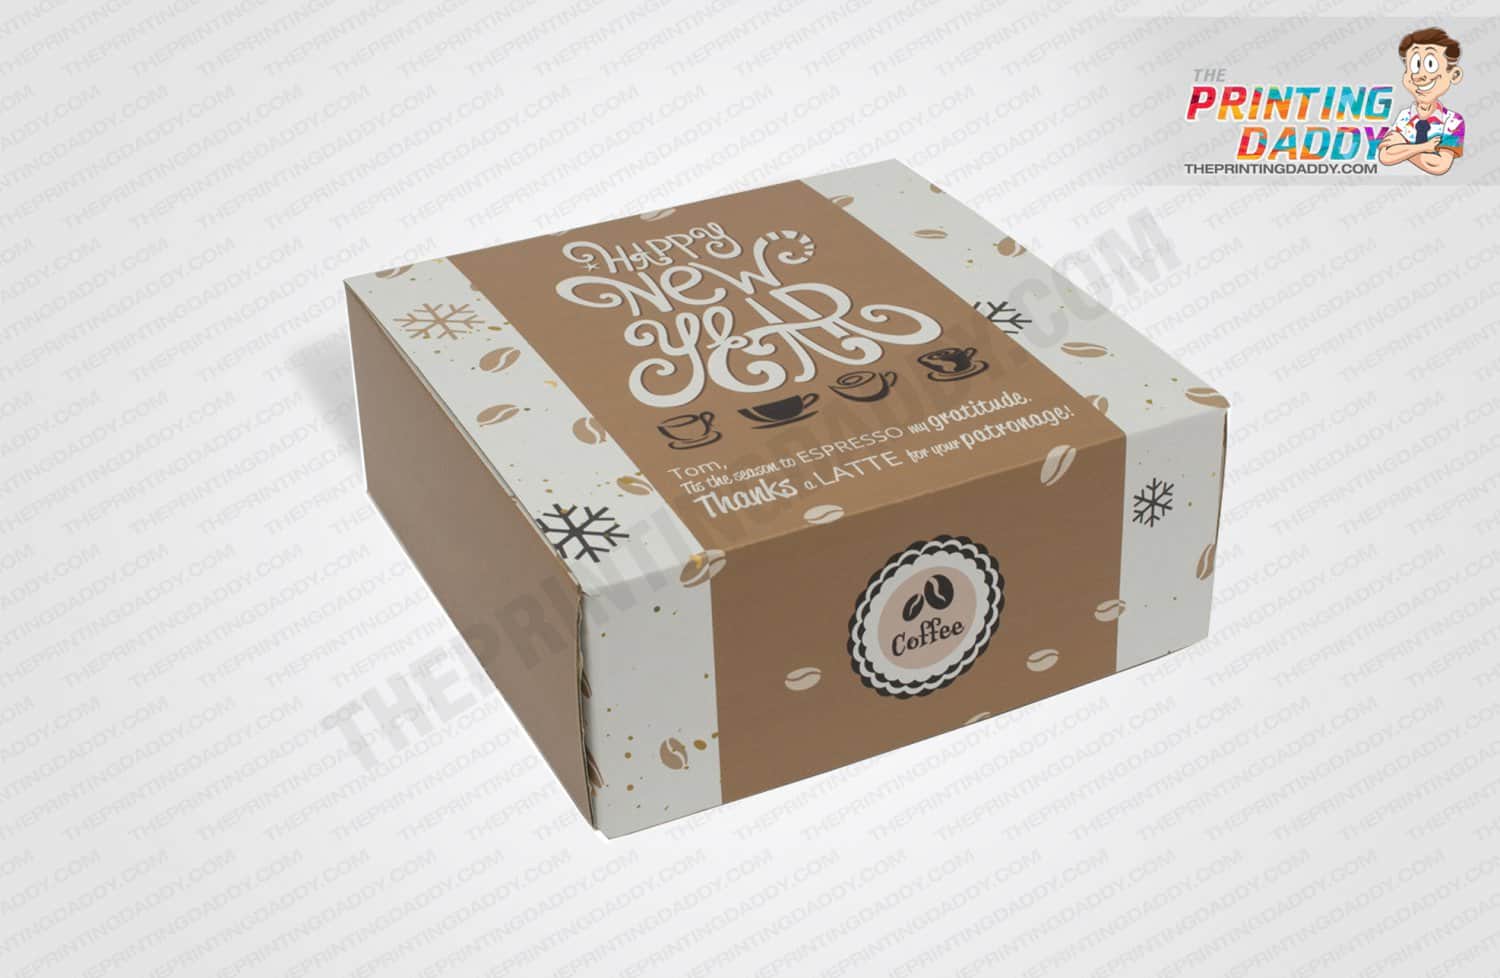 Download Custom Design Packaging for Coffee Boxes - The Printing Daddy